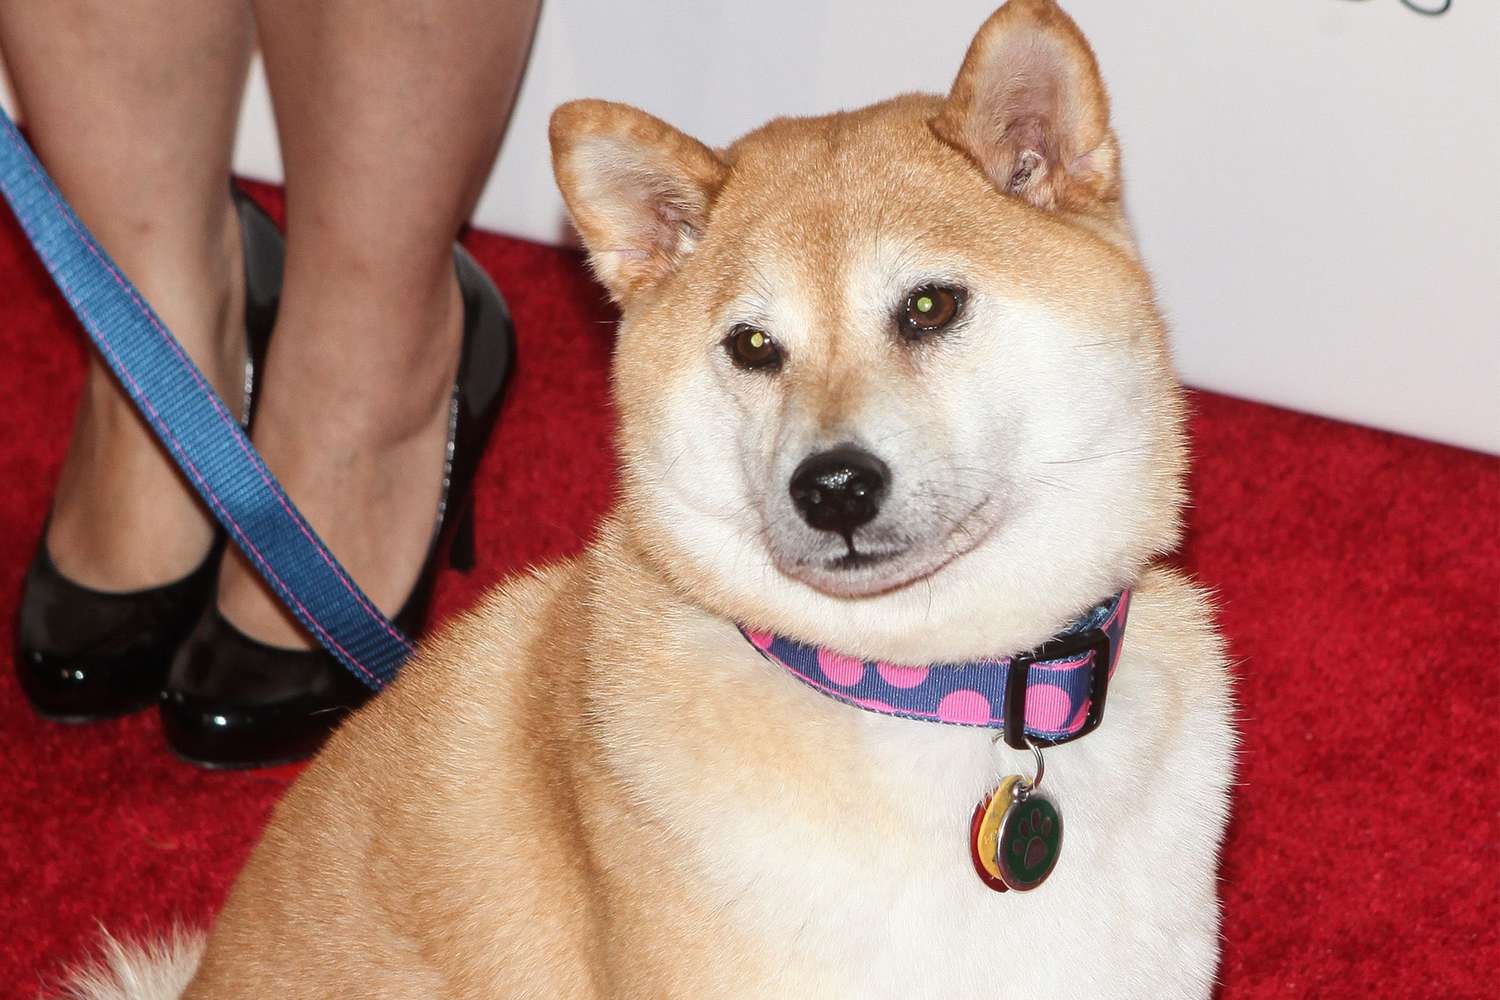 Shiba Inu That Inspired 'Doge' Meme Severely Ill, Says Owner